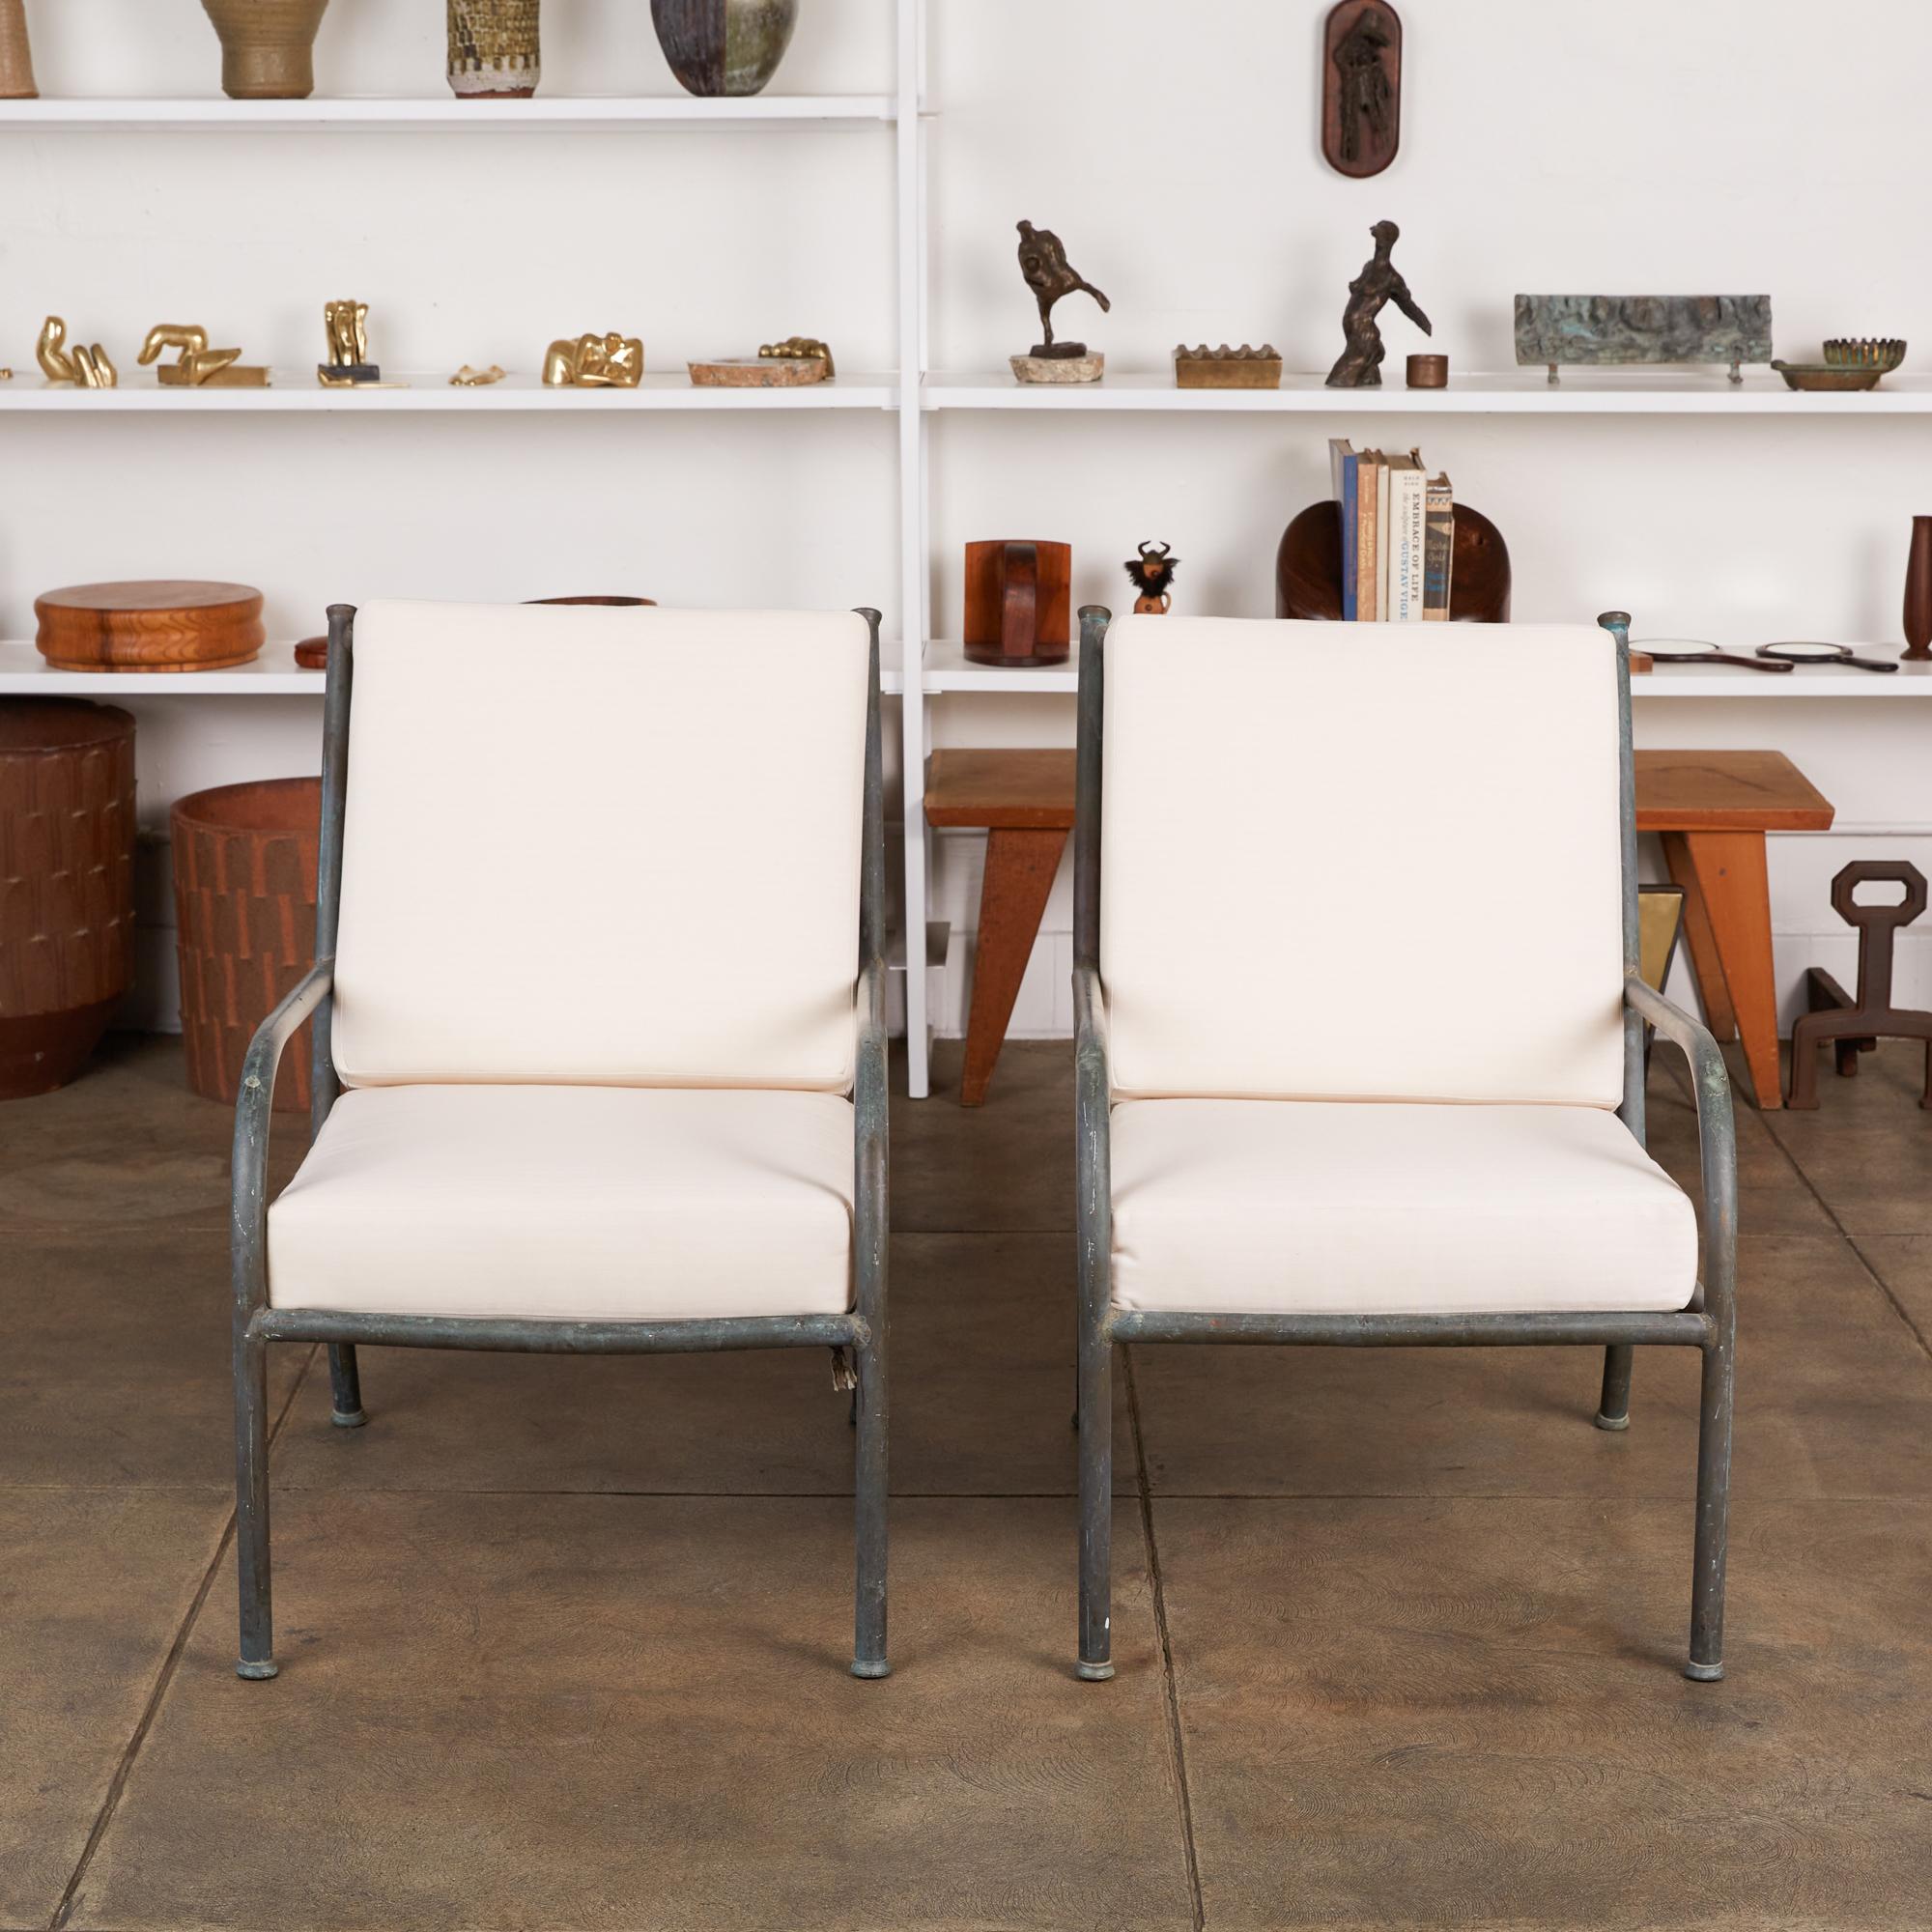 A pair of California-made bronze patio lounge chairs by Walter Lamb antecedent, Robert Lewis, c.1940s. The chairs feature a patinated bronze tubing frame with new Sunbrella back and seat cushions that are supported by woven rope.

Dimensions: